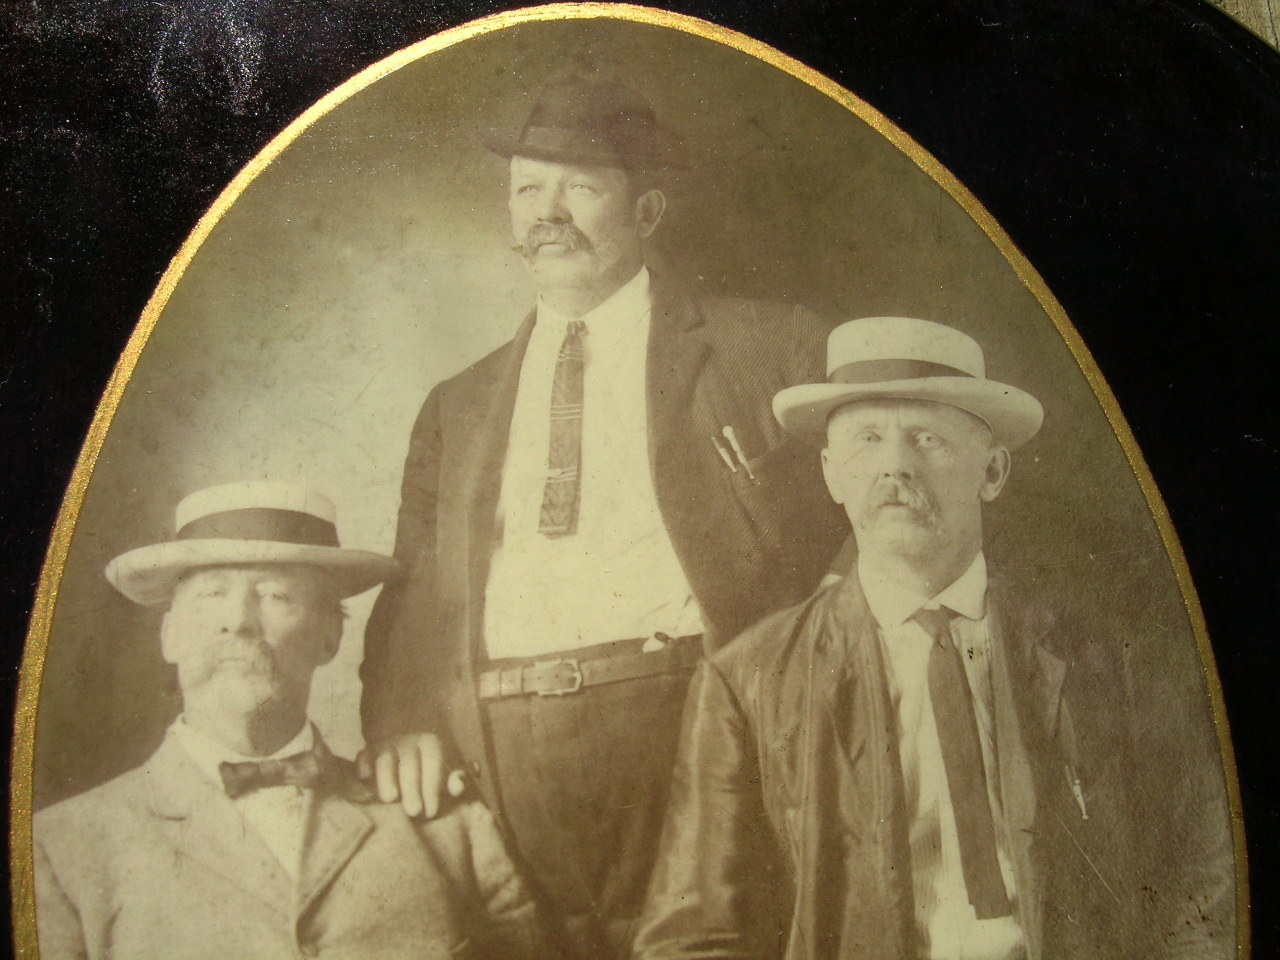 William, Albert, and Jacob Jarrell, brothers, on occasion of a visit home by William